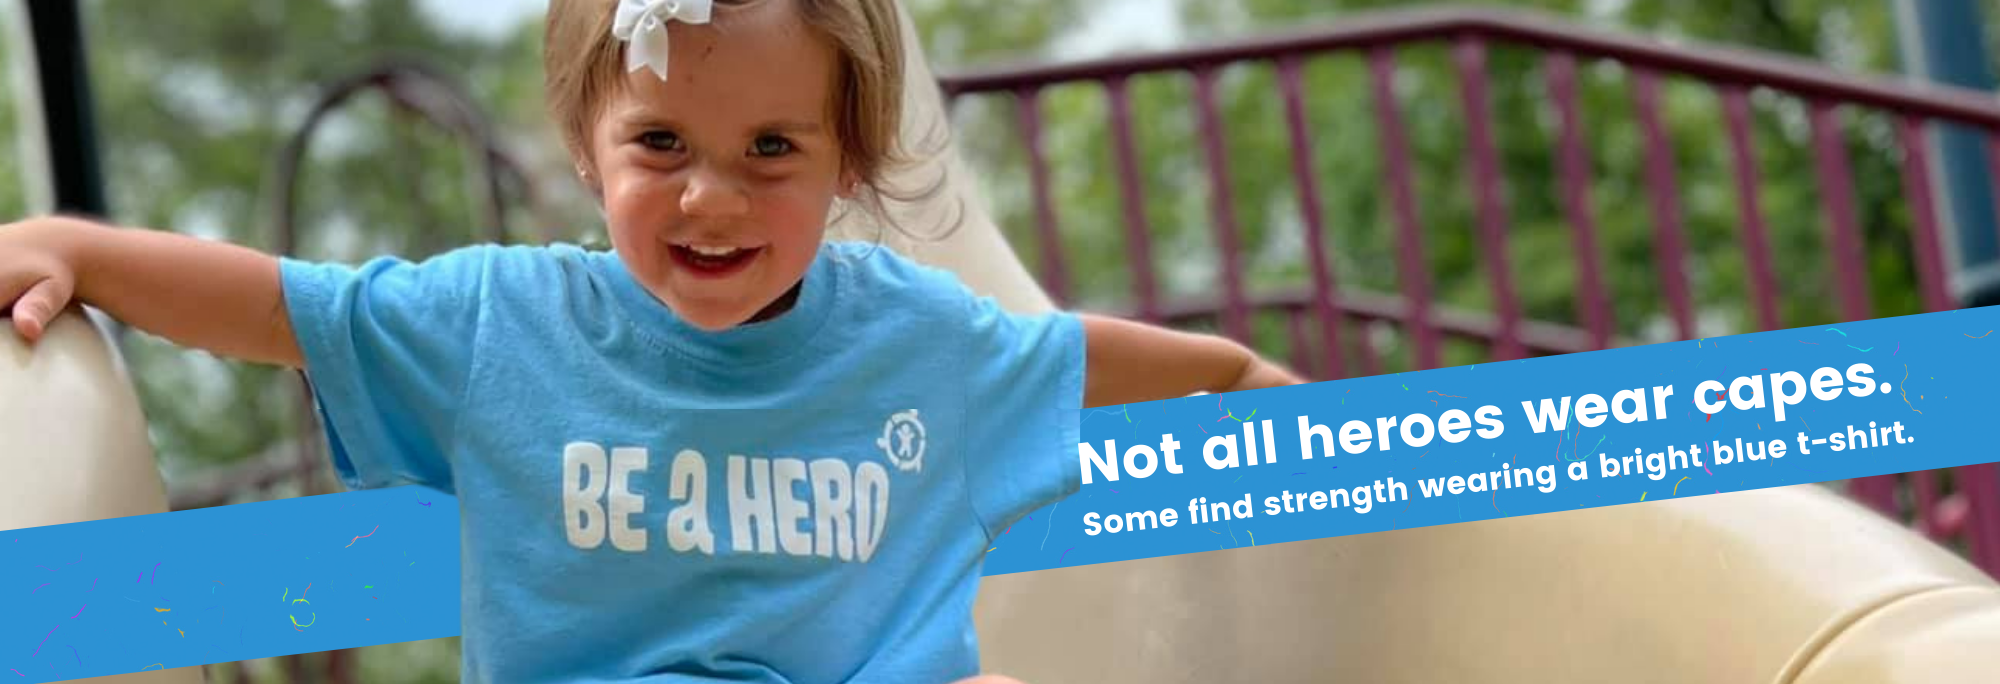 A child with a pink bow in her hair going down a slide wearing a bright blue tee shirt that reads Be A Hero The text reads Not all heroes wear capes. Some find strength wearing a bright blue t-shirt.